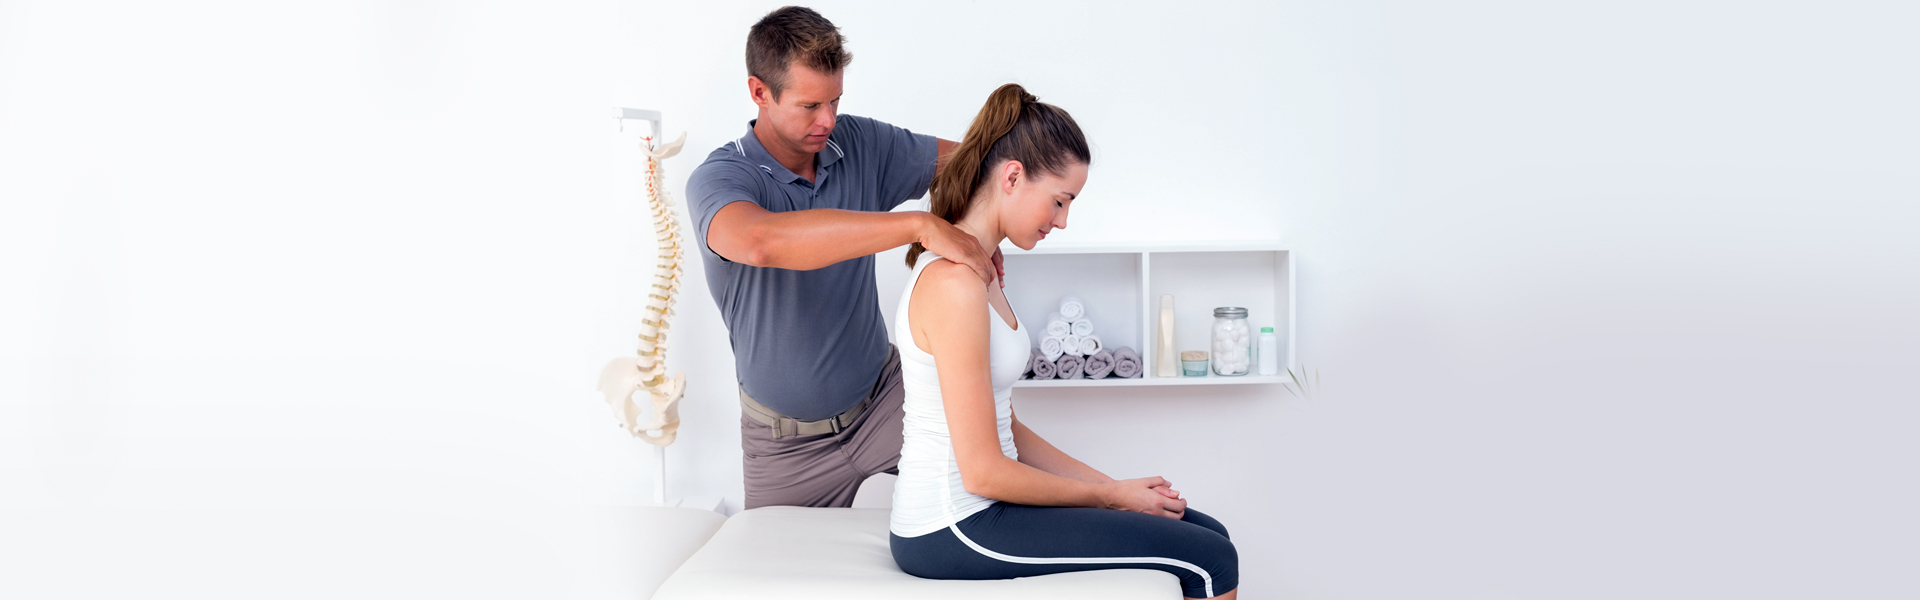 Chiropractic Adjustment: All You Need to Know